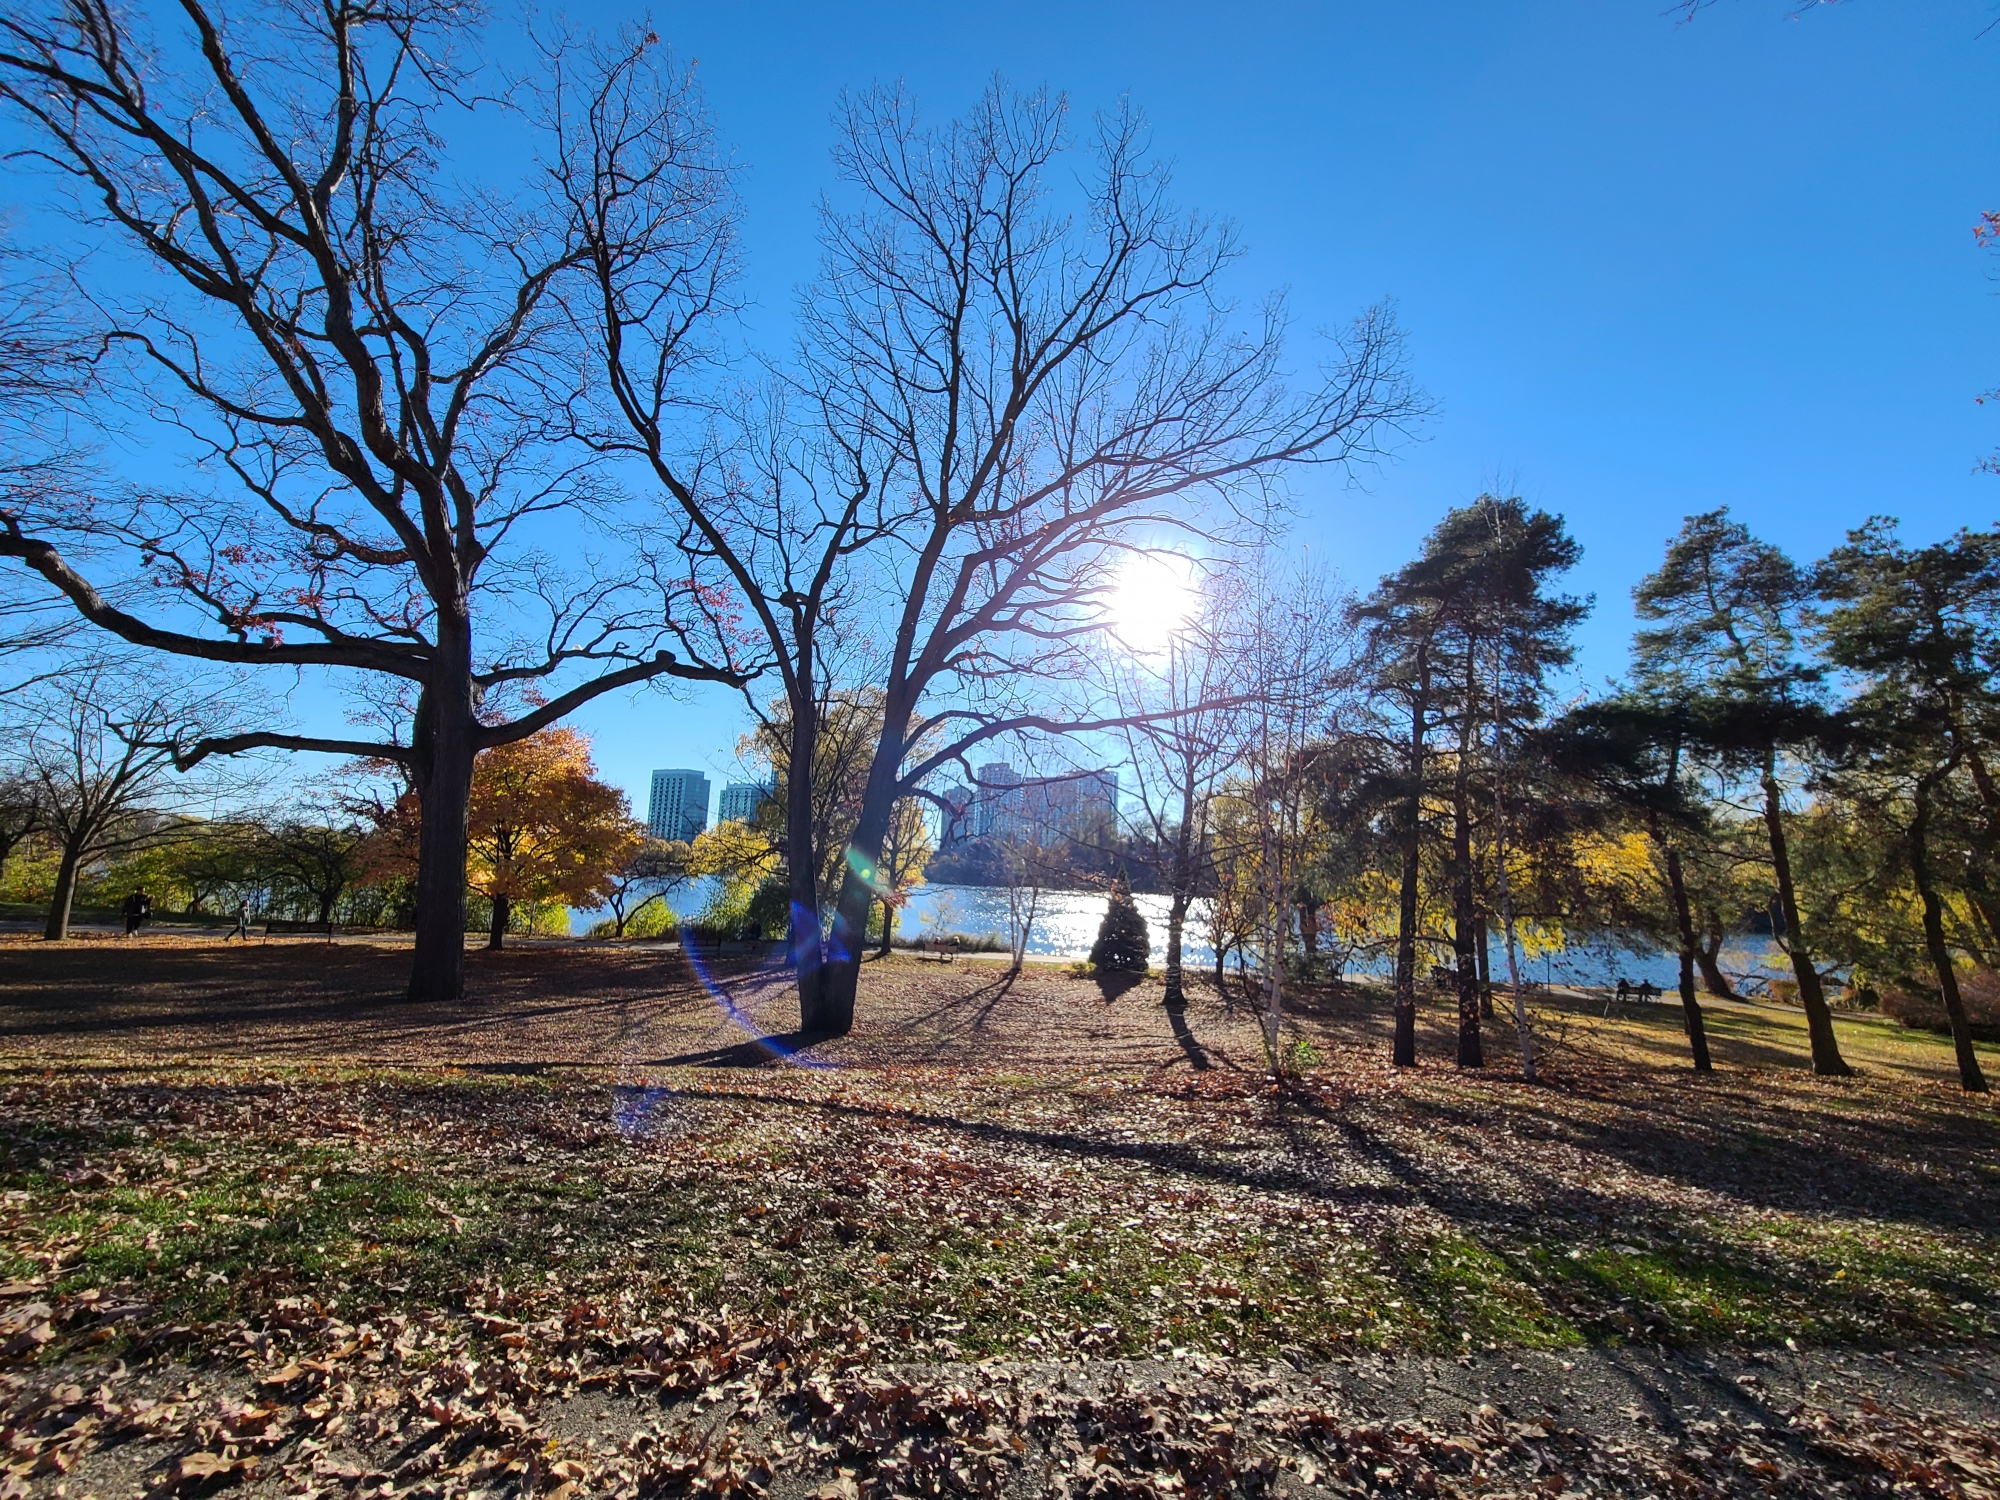 View in High Park by Grenadier Pond in early November in Toronto